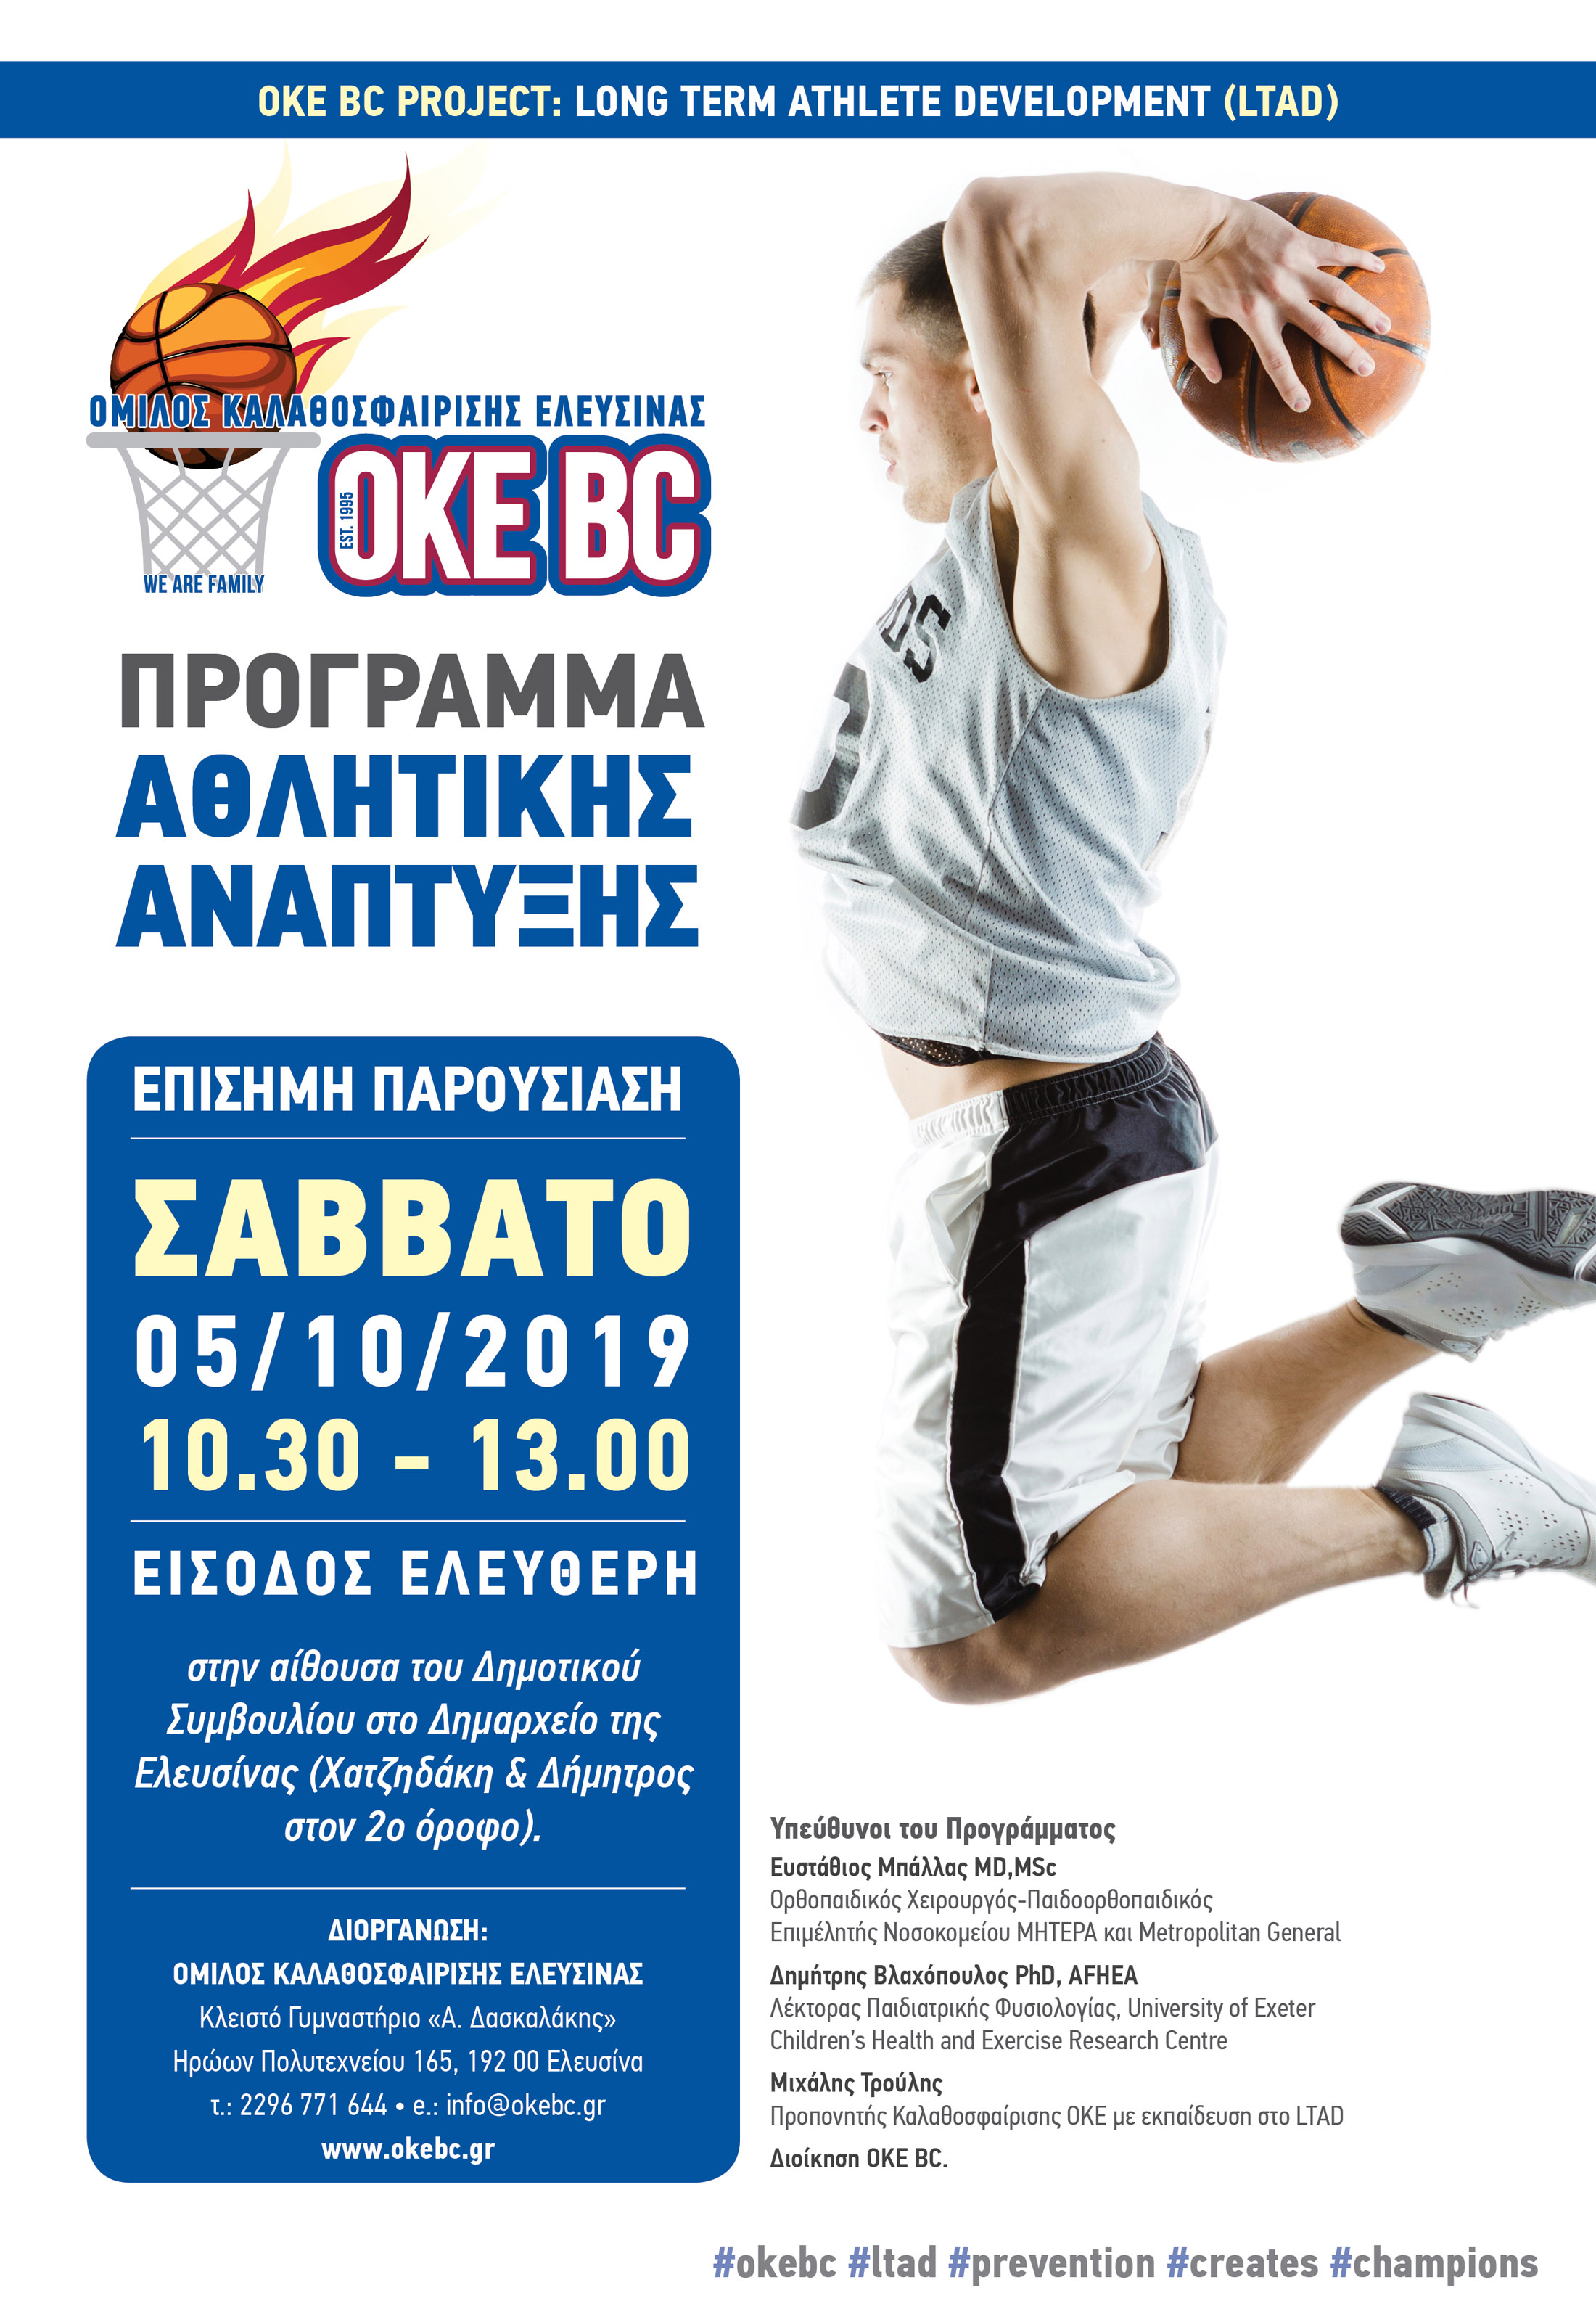 LTAD official poster